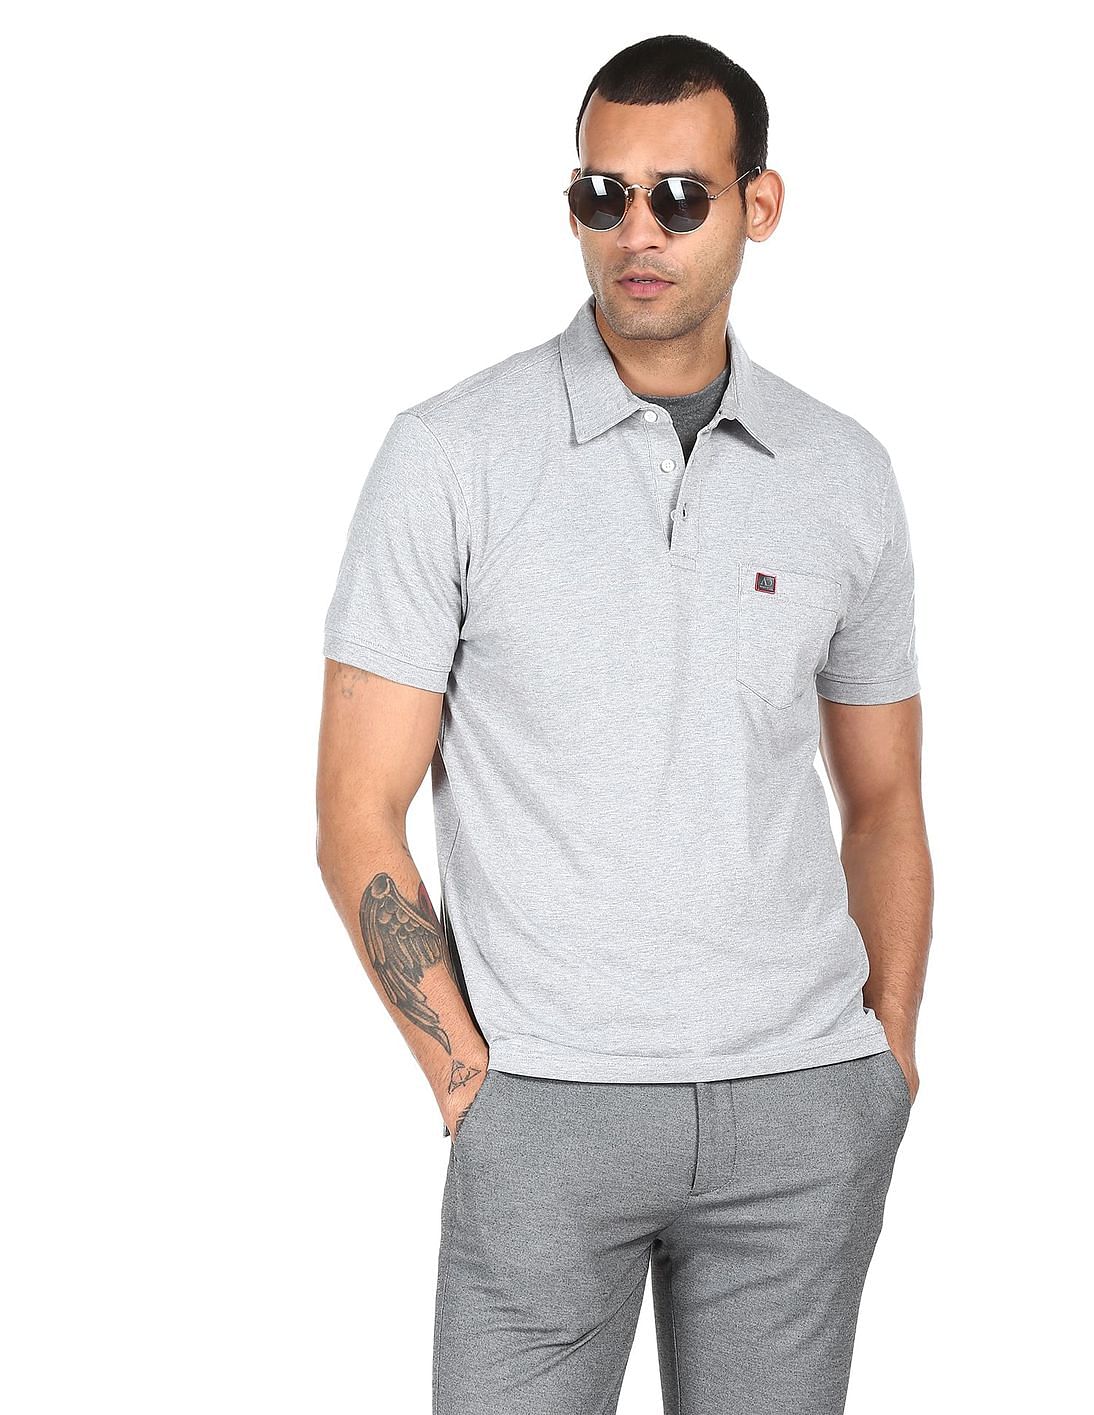 Buy AD by Arvind Cotton Heathered Polo Shirt - NNNOW.com